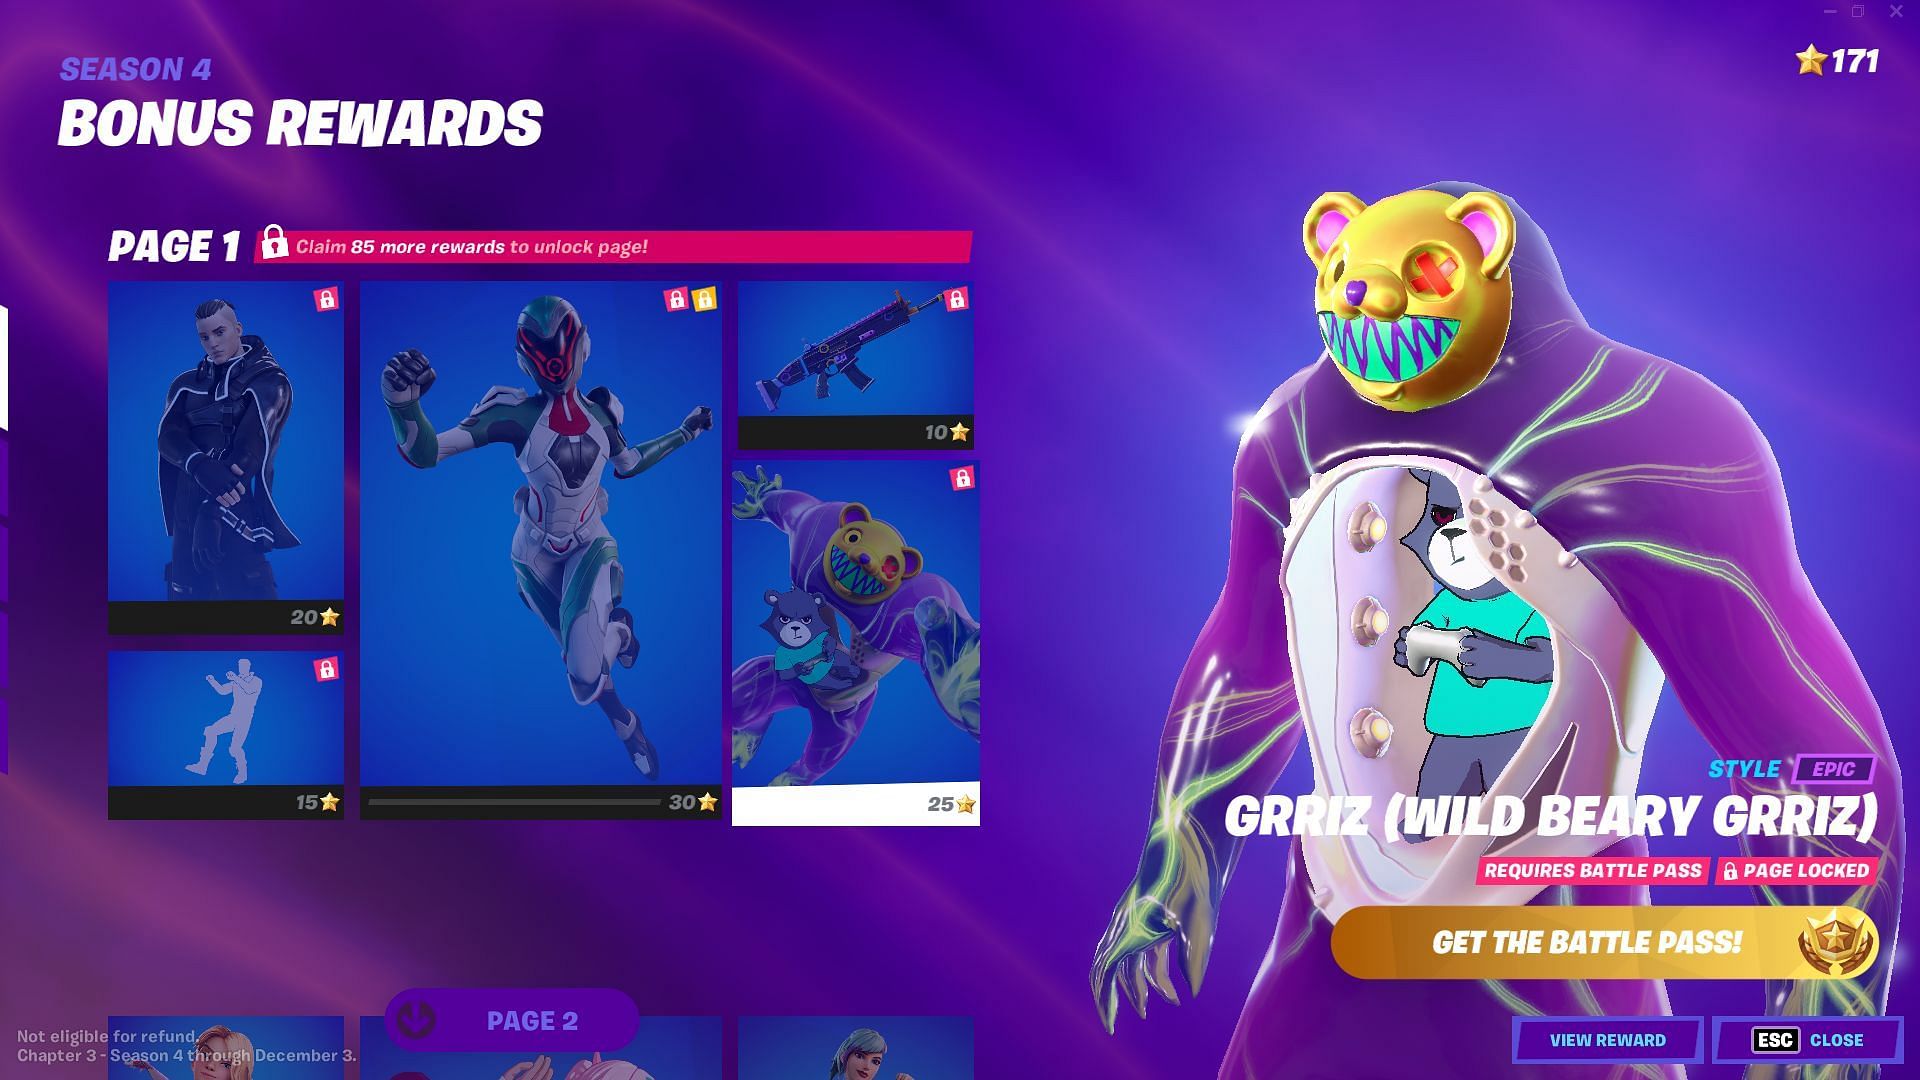 Bear-ception at its finest (Image via Epic Games/Fortnite)